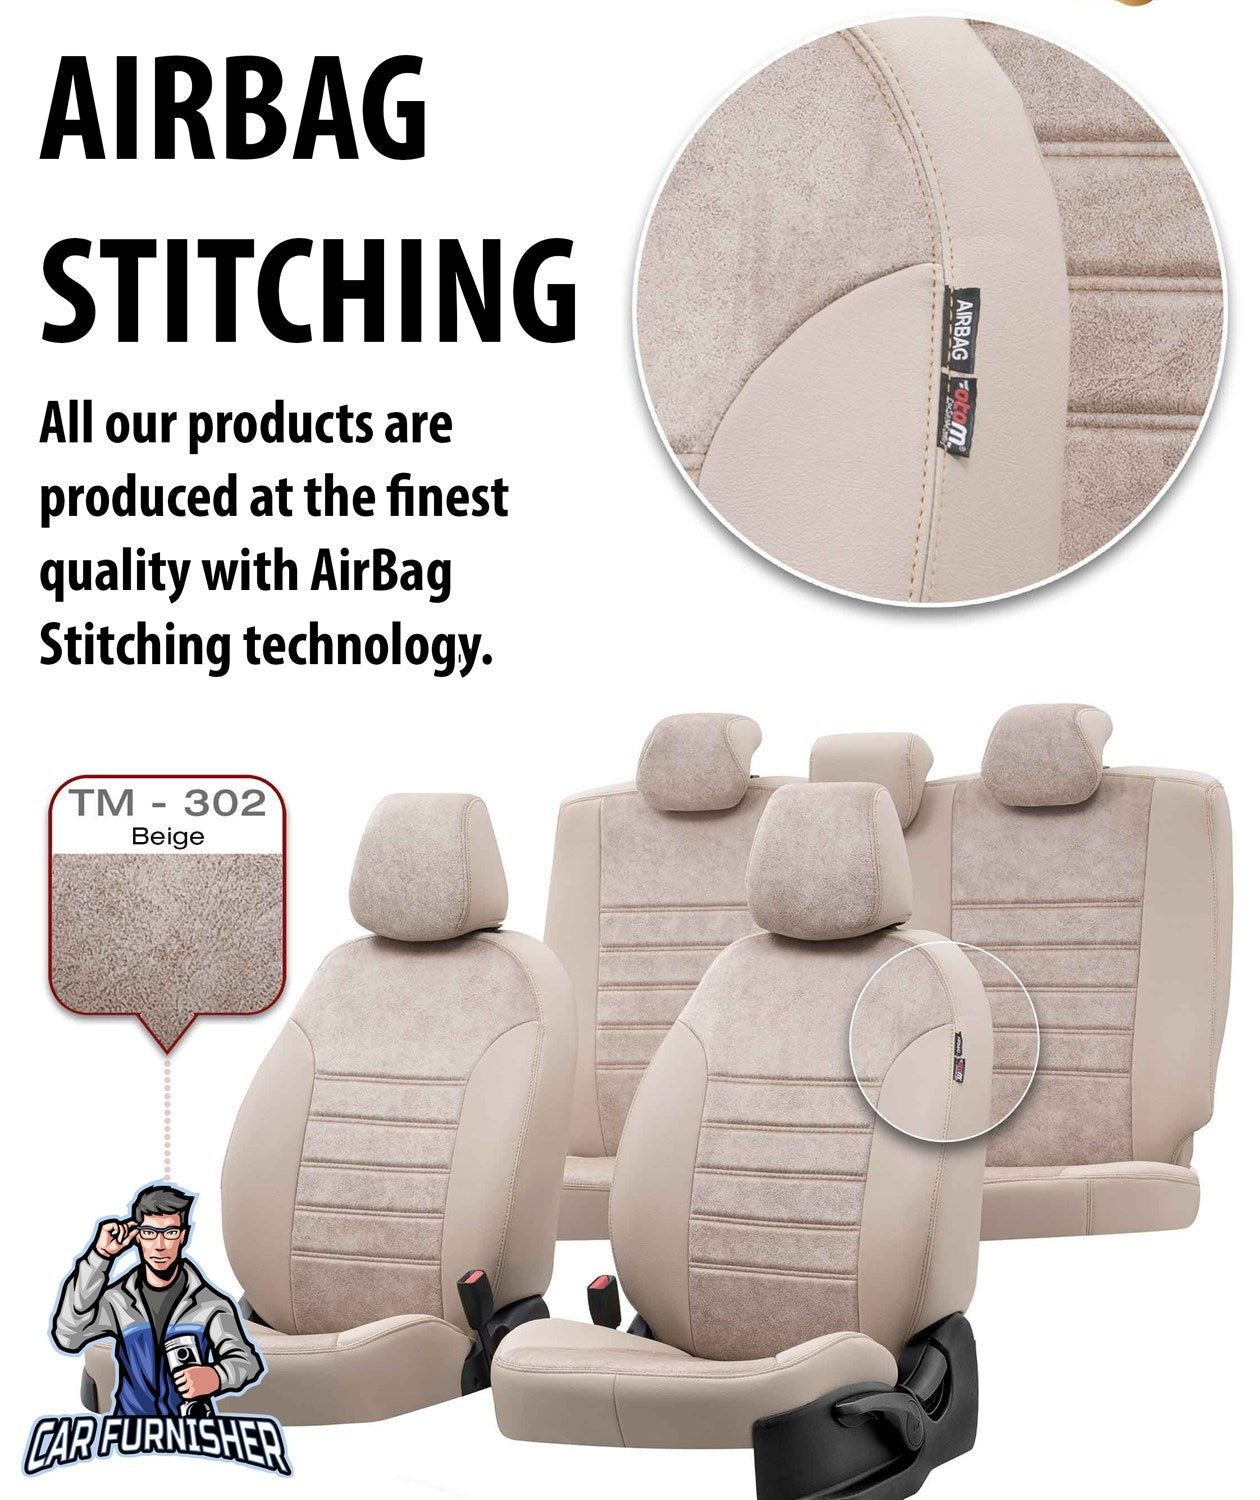 Man TGS Seat Cover Milano Suede Design Smoked Front Seats (2 Seats + Handrest + Headrests) Leather & Suede Fabric